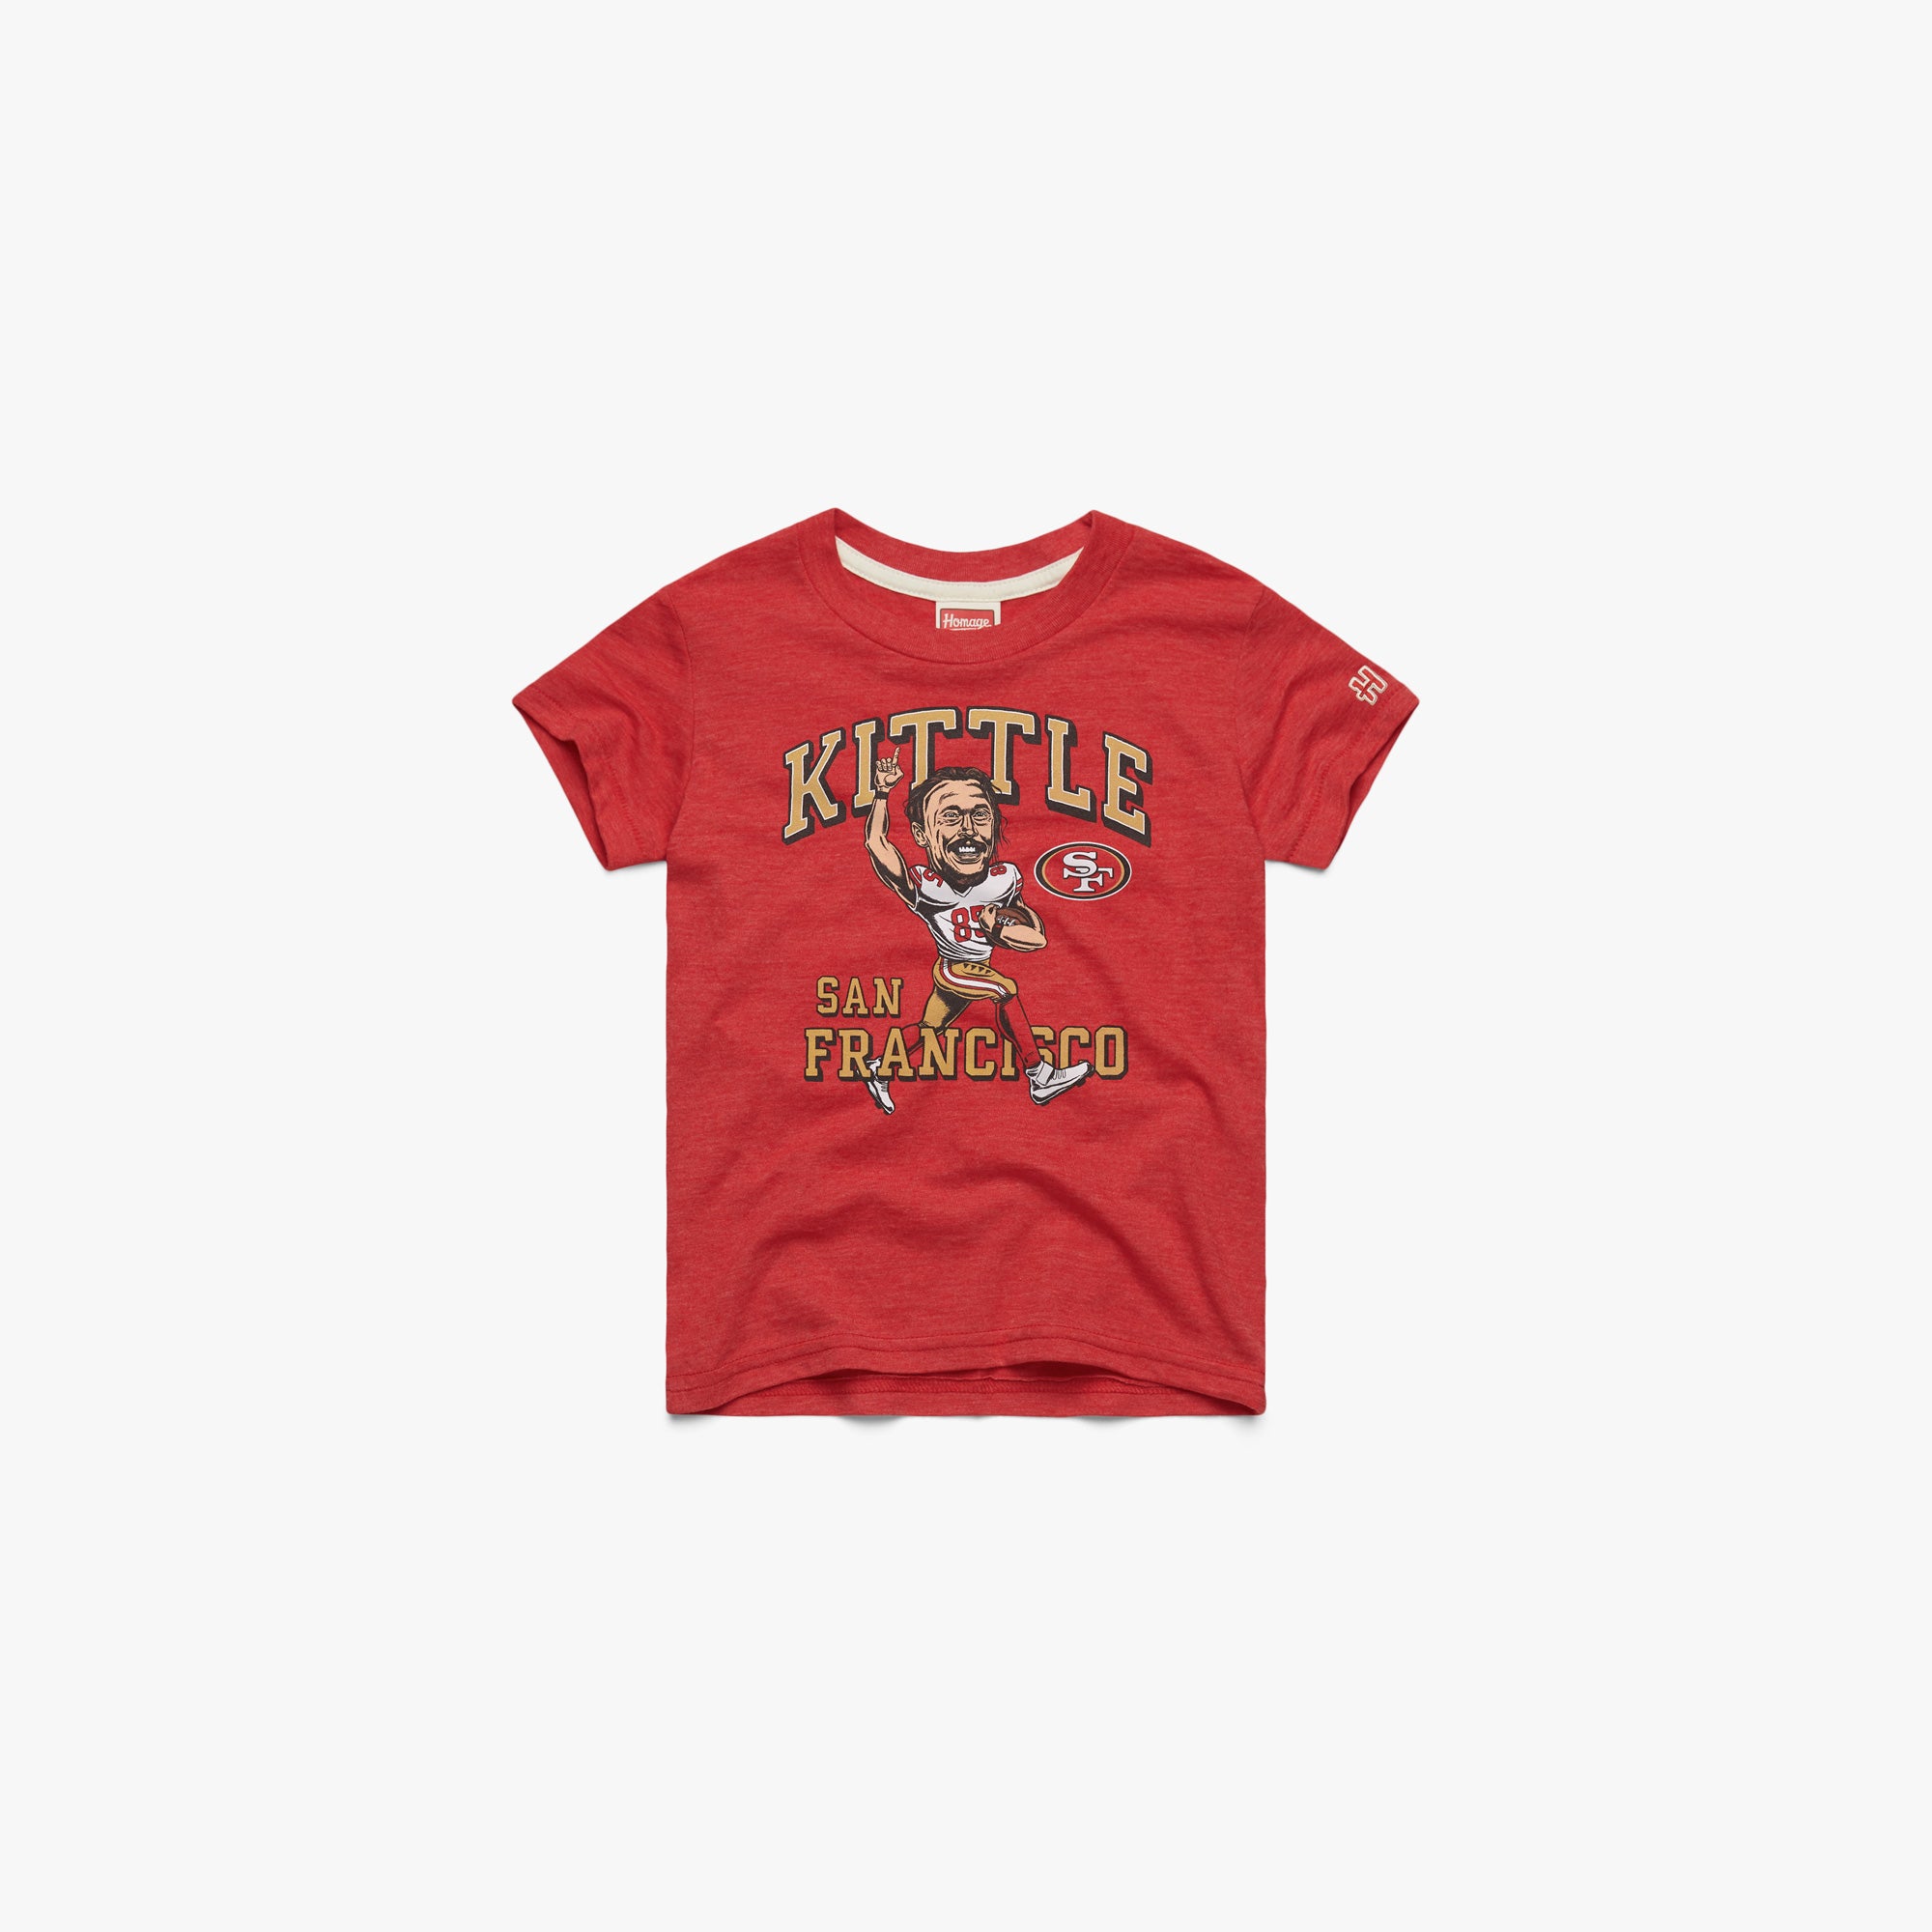 Youth San Francisco 49ers George Kittle Youth T-Shirt from Homage. | Officially Licensed Vintage NFL Apparel from Homage Pro Shop.